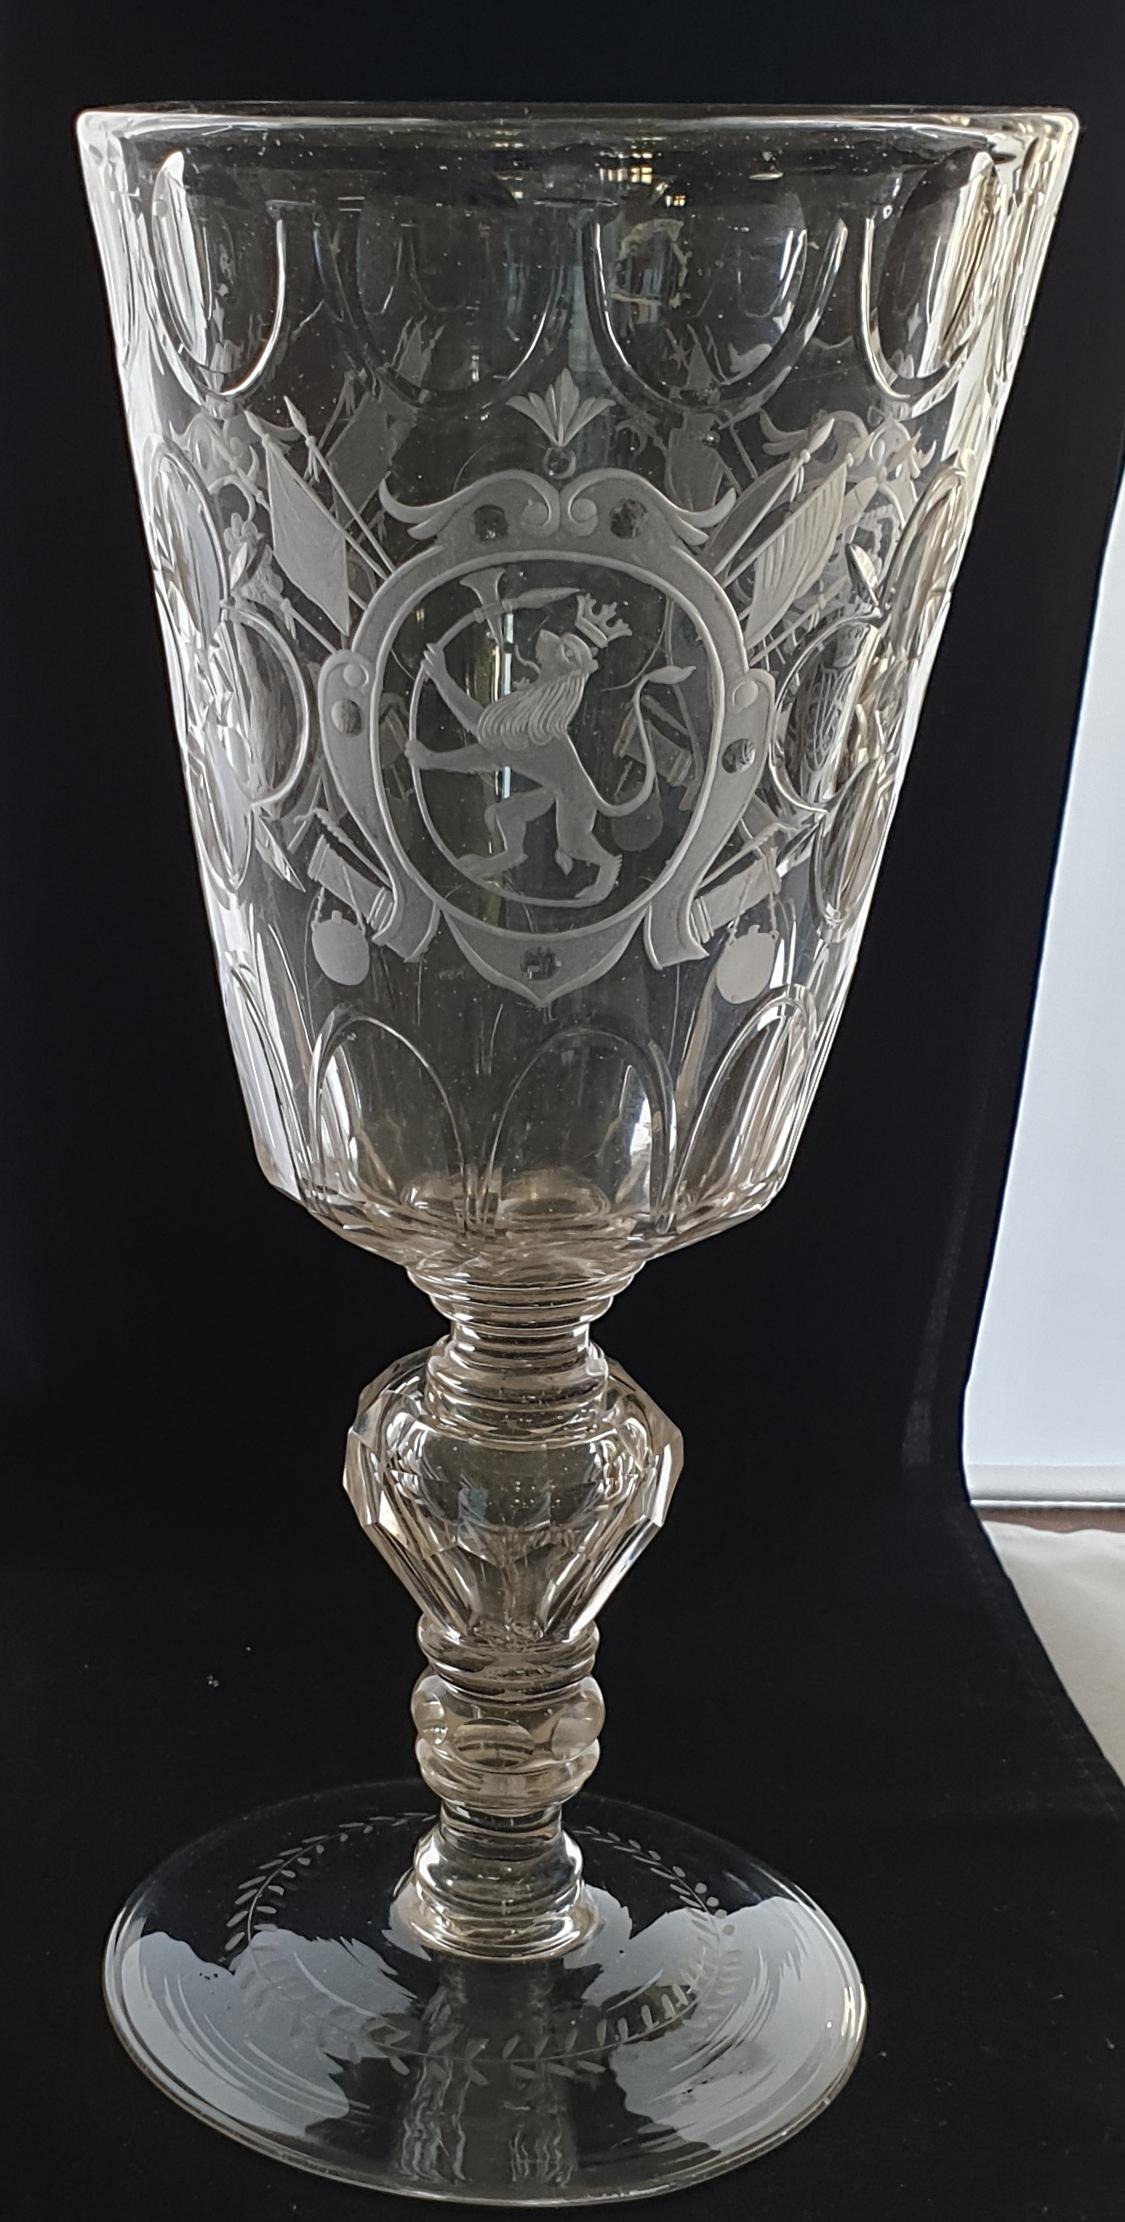 German Oversized Goblet, Engraved with the King of Denmark & Norway, 1725